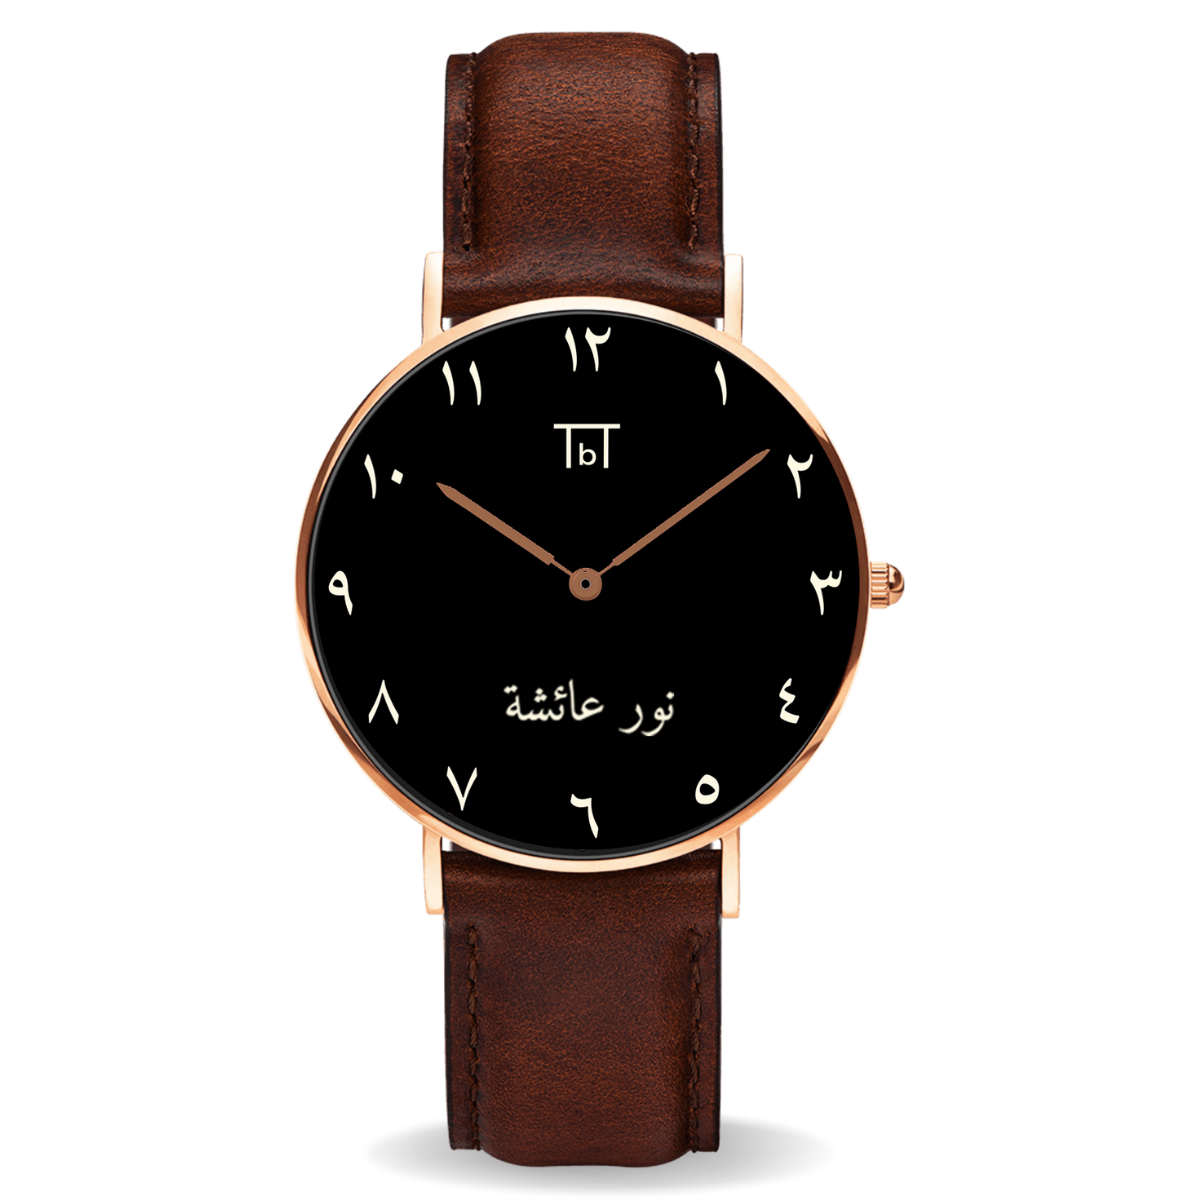 Arabic Rose Gold Black dial with Brown Leather Strap FOR HIM